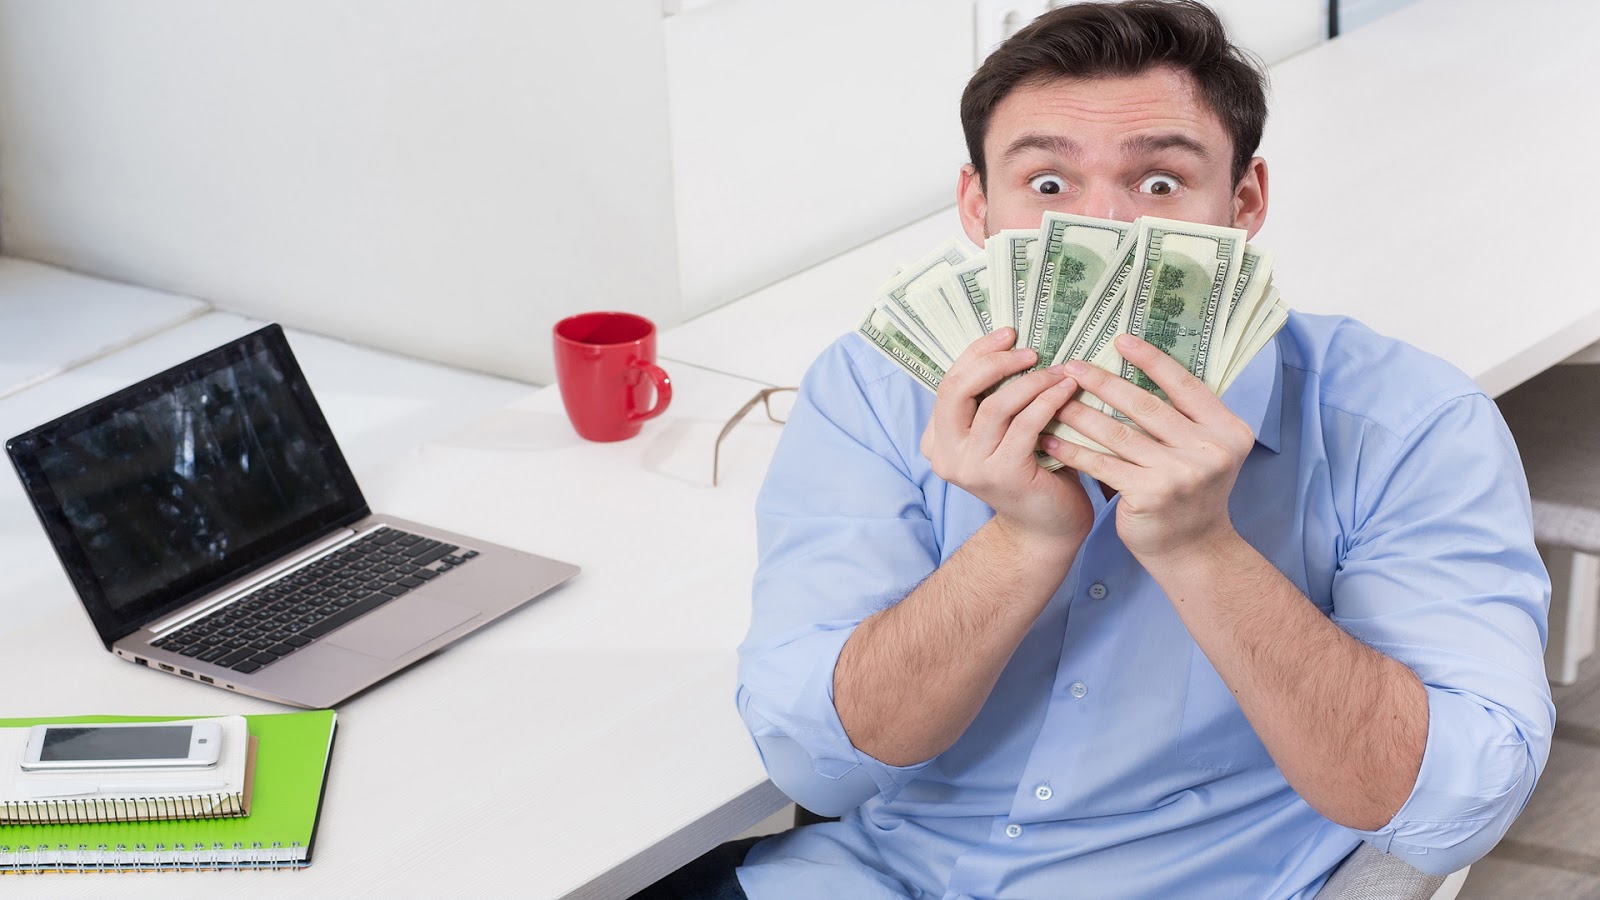 How to earn $700 online